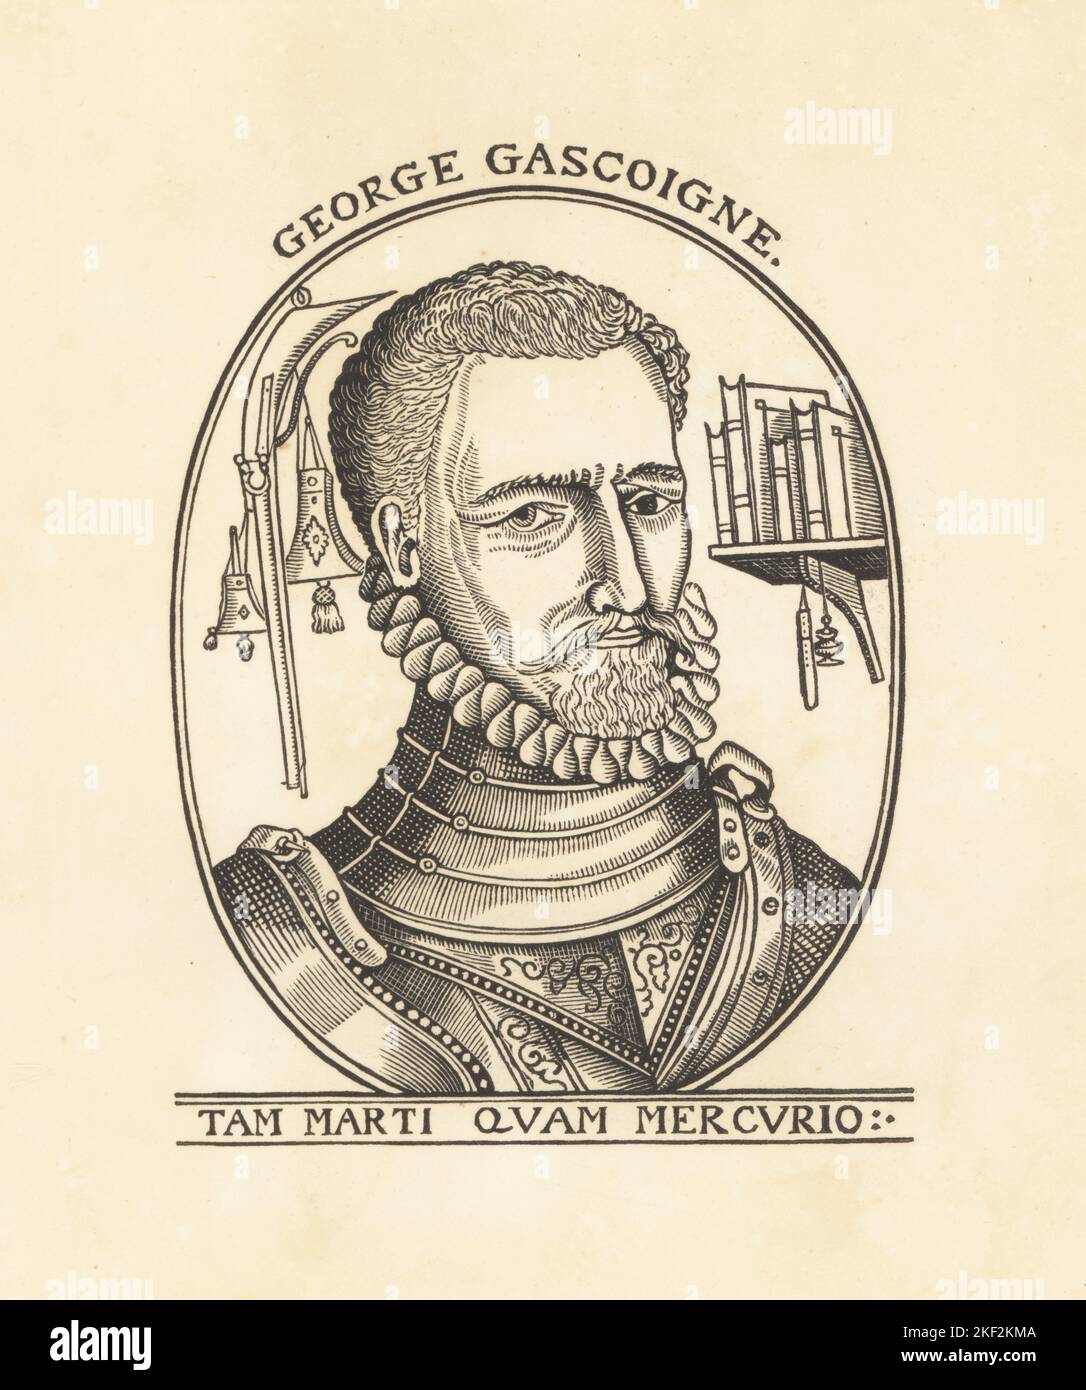 George Gascoigne, English poet, soldier and courtier of the Elizabethan era, 1534-1577. In ruff collar and suit of armour, with books on a shelf. Tam Marti Quam Mercurio. From the woodcut frontispiece to his Steele Glas and Complaynte of Phylomene, 1576. Copperplate engraving from Samuel Woodburn’s Gallery of Rare Portraits Consisting of Original Plates, George Jones, 102 St Martin’s Lane, London, 1816. Stock Photo